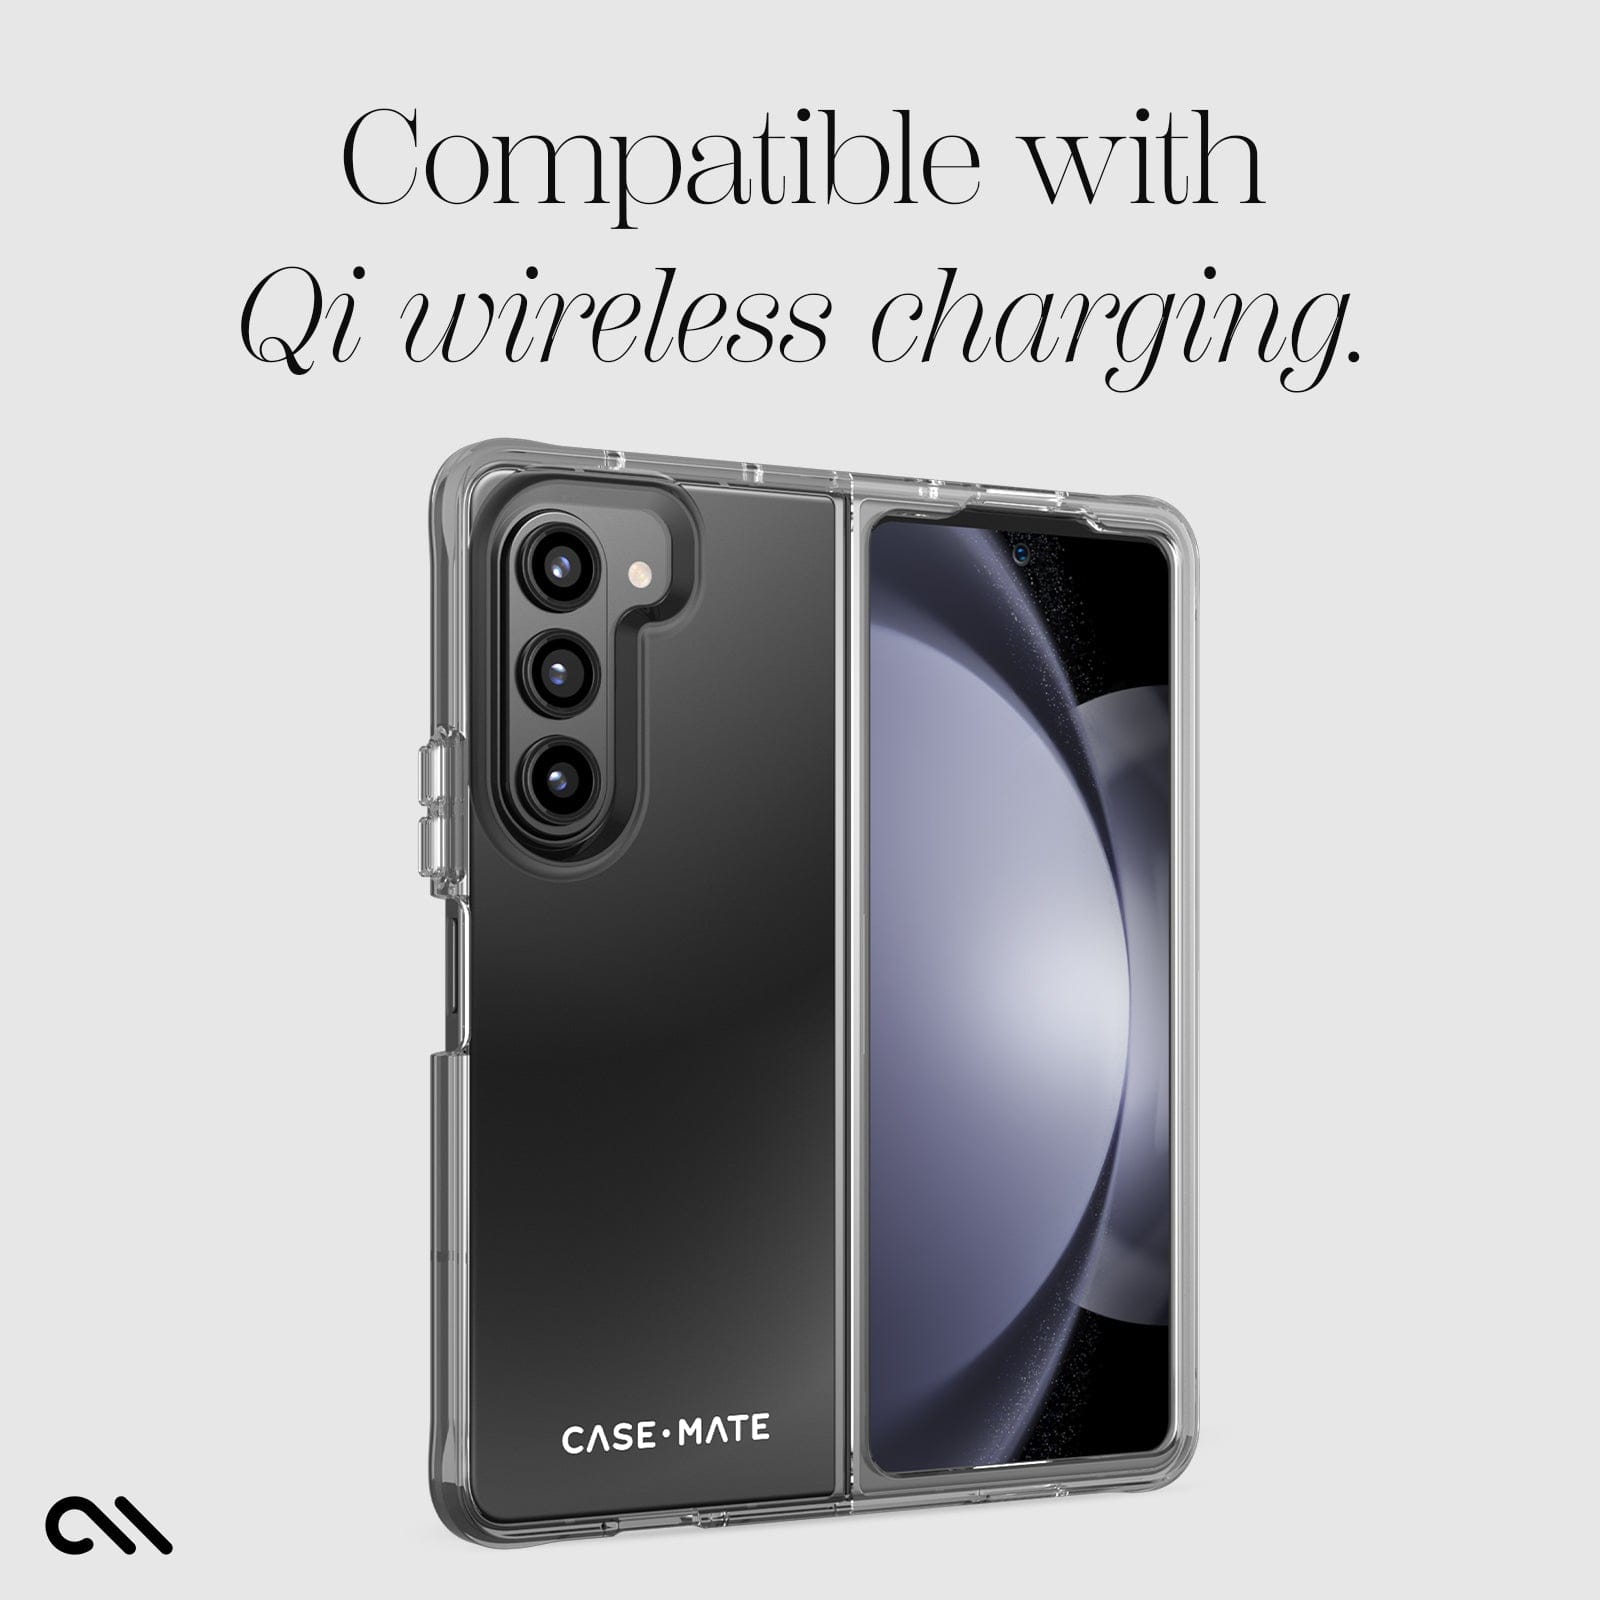 COMPATIBLE WITH QI WIRELESS CHARGING